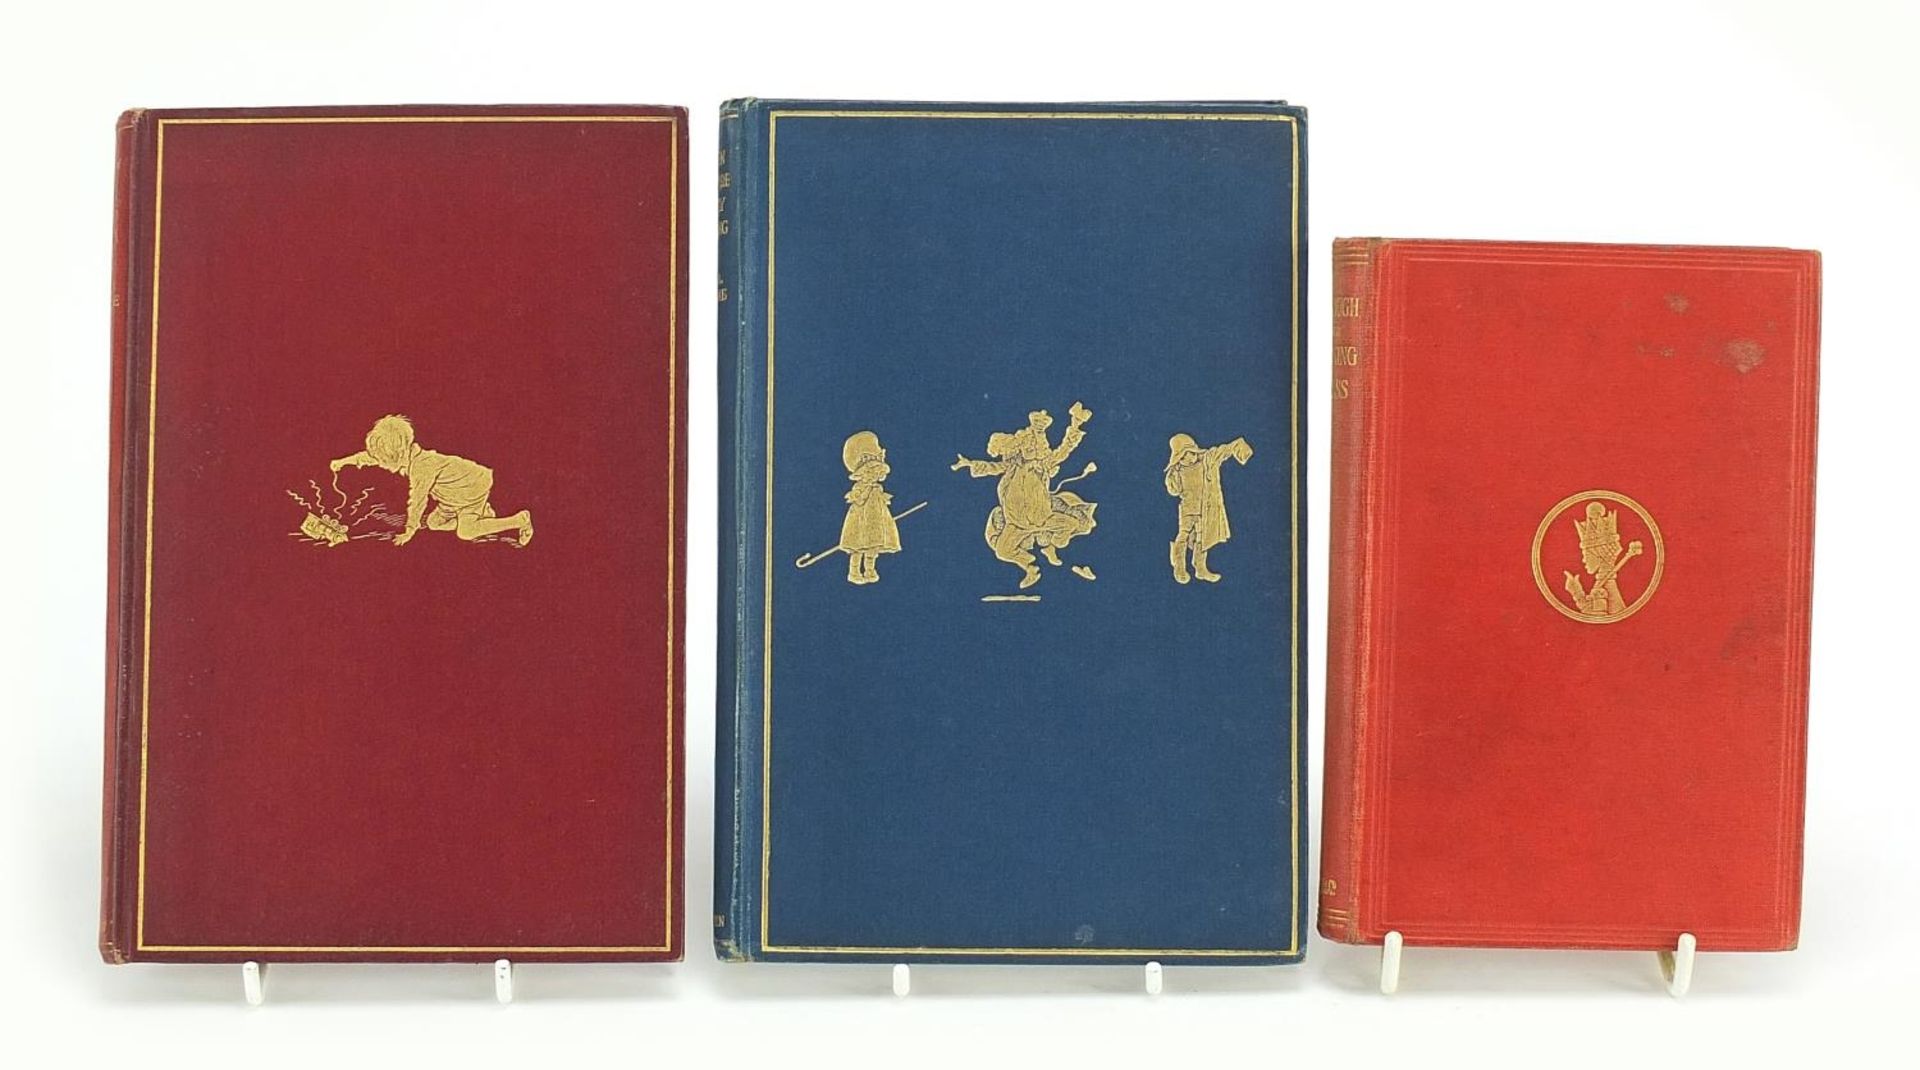 Three children's hardback books comprising Now We Are Six, first published 1927, When We Were Very